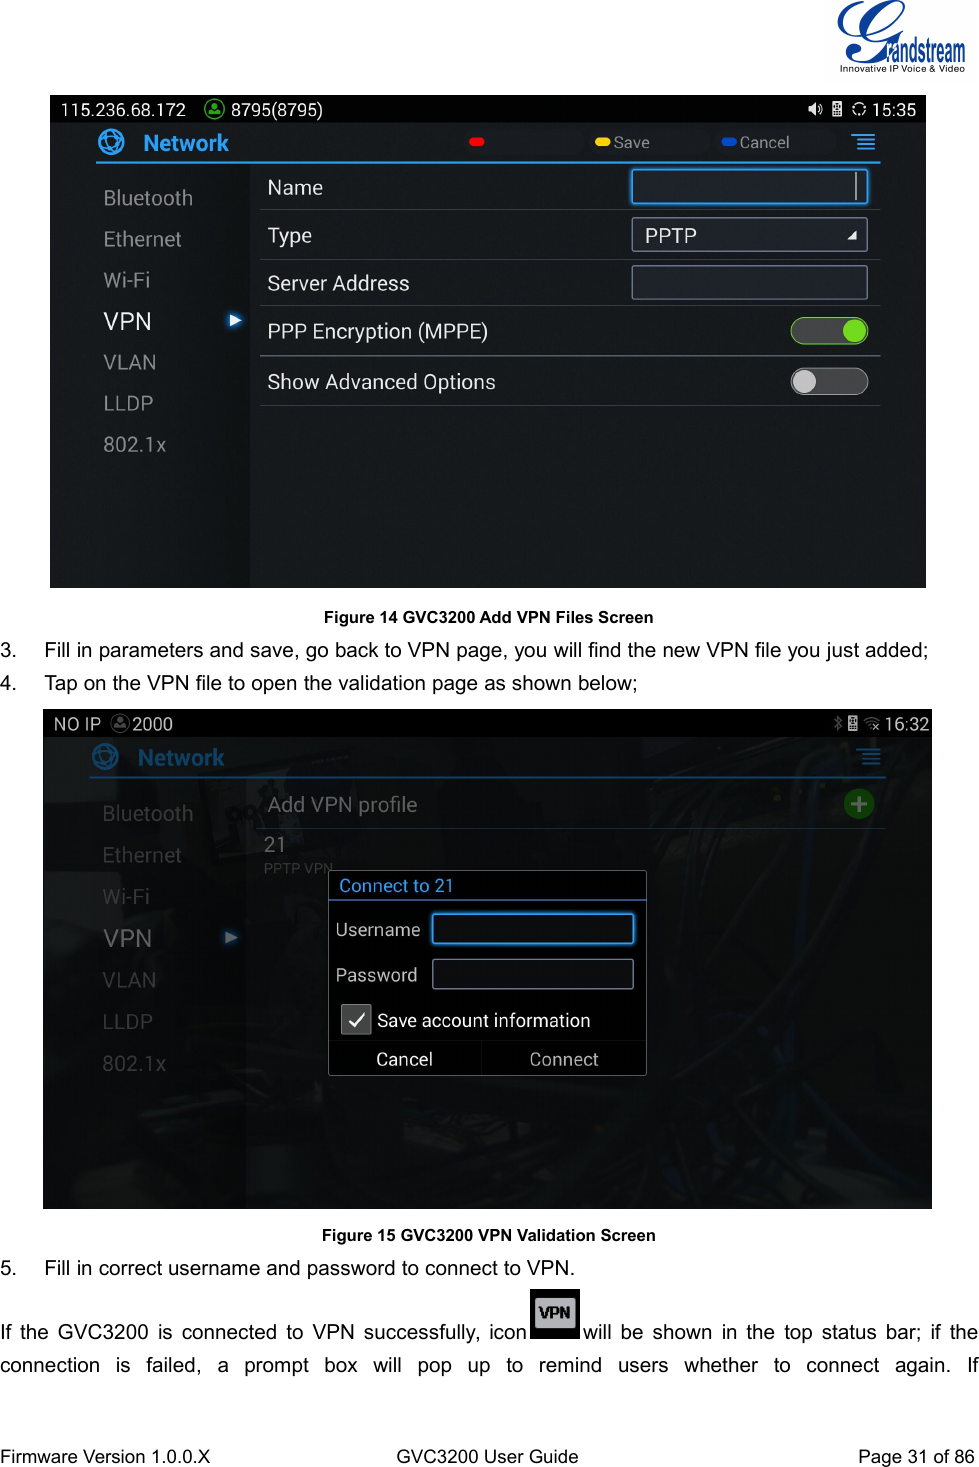 Firmware Version 1.0.0.XGVC3200 User GuidePage 31 of 86Figure 14 GVC3200 Add VPN Files Screen3. Fill in parameters and save, go back to VPN page, you will find the new VPN file you just added;4. Tap on the VPN file to open the validation page as shown below;Figure 15 GVC3200 VPN Validation Screen5. Fill in correct username and password to connect to VPN.If the GVC3200 is connected to VPN successfully, icon will be shown in the top status bar; if theconnection is failed, a prompt box will pop up to remind users whether to connect again. If